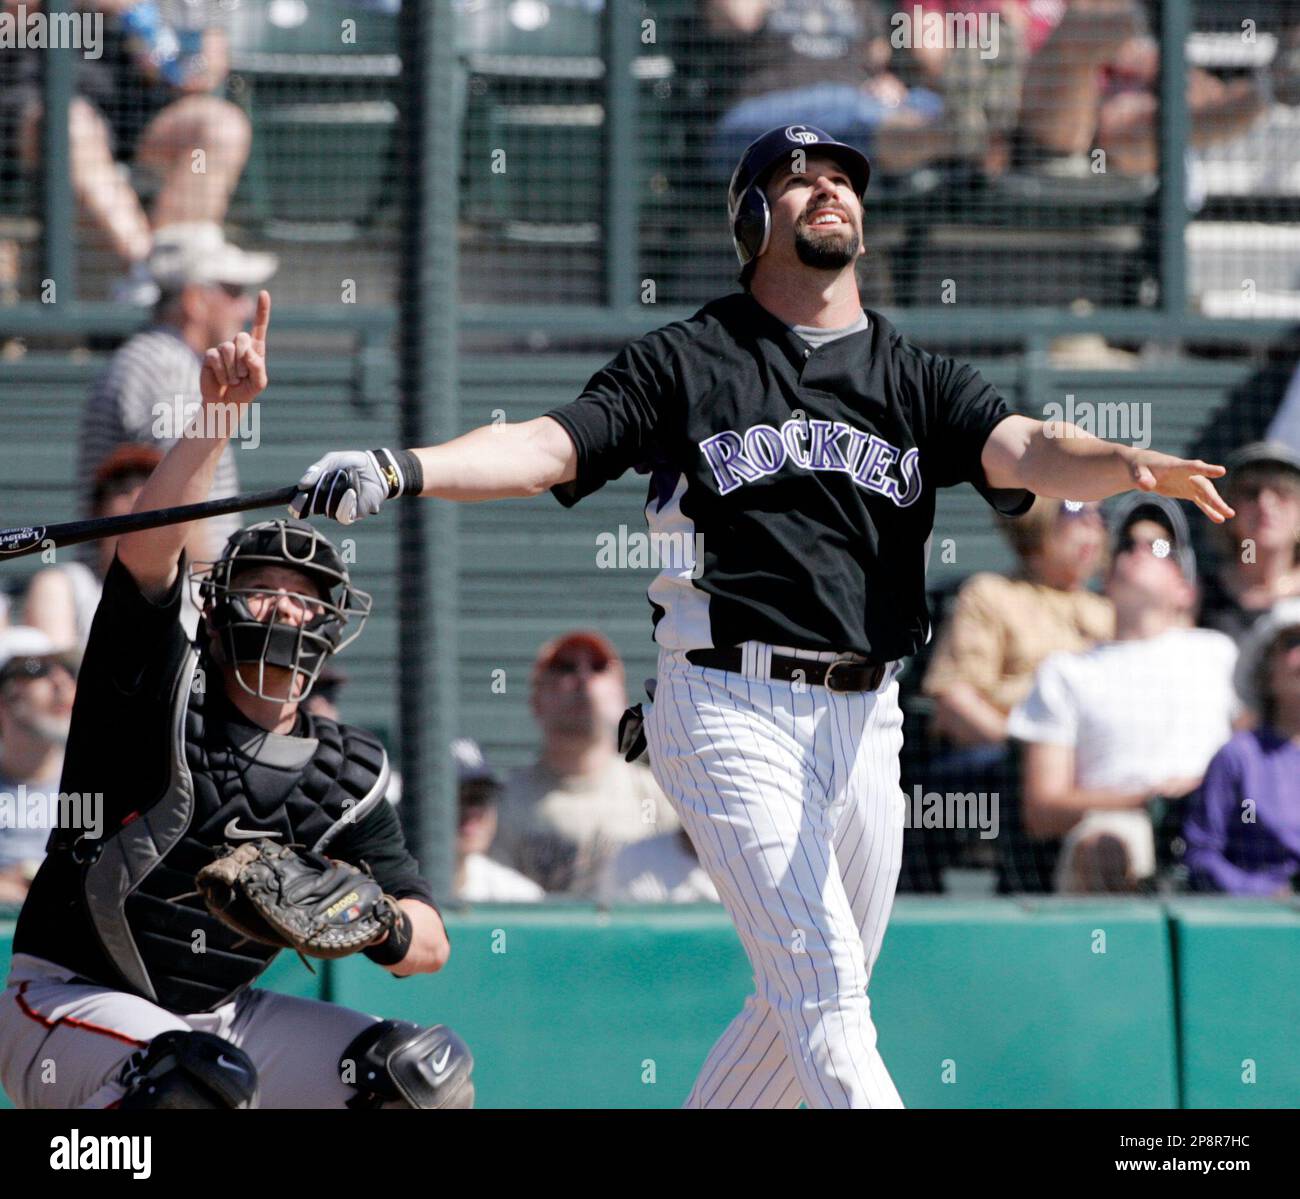 Todd Helton HR Reel, home run, career, Colorado Rockies, Throughout his  17 year career with the Rockies, Todd Helton hit a franchise-record 369  home runs., By Colorado Rockies Highlights